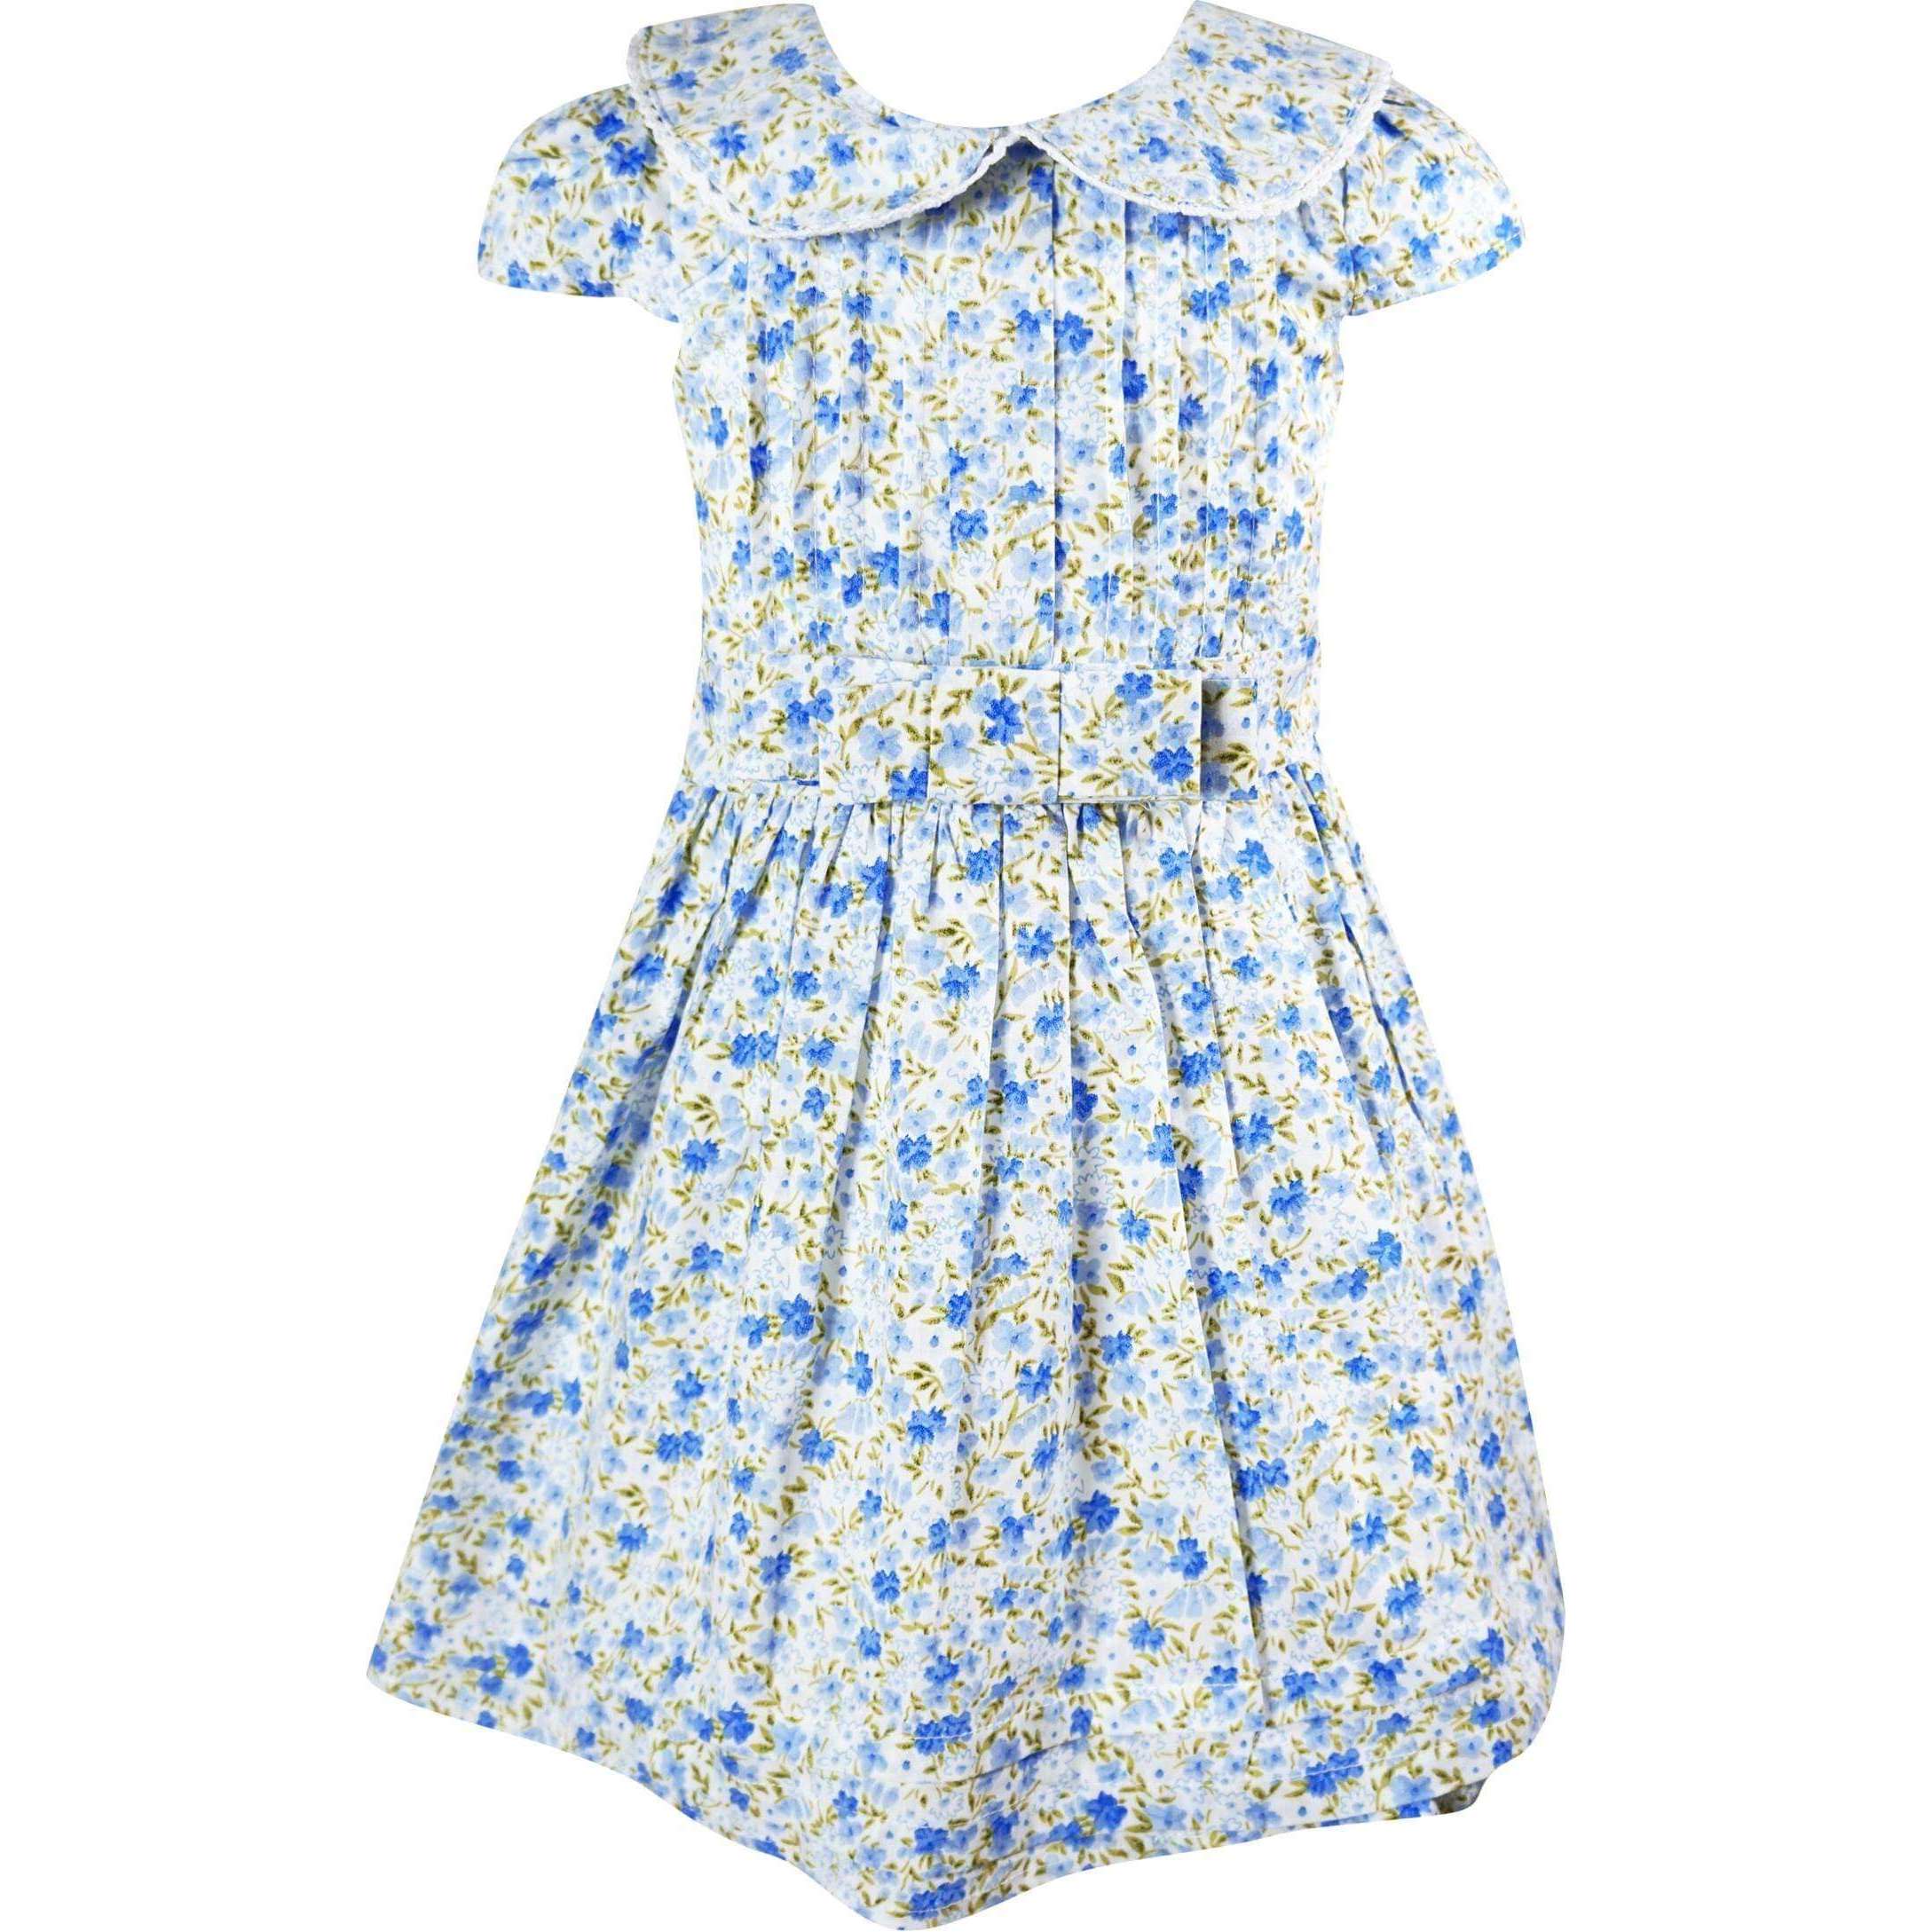 Baby Girls Back To School Classic Vintage Liberty Floral Peter Pan Dress - Blue - Angeline Kids